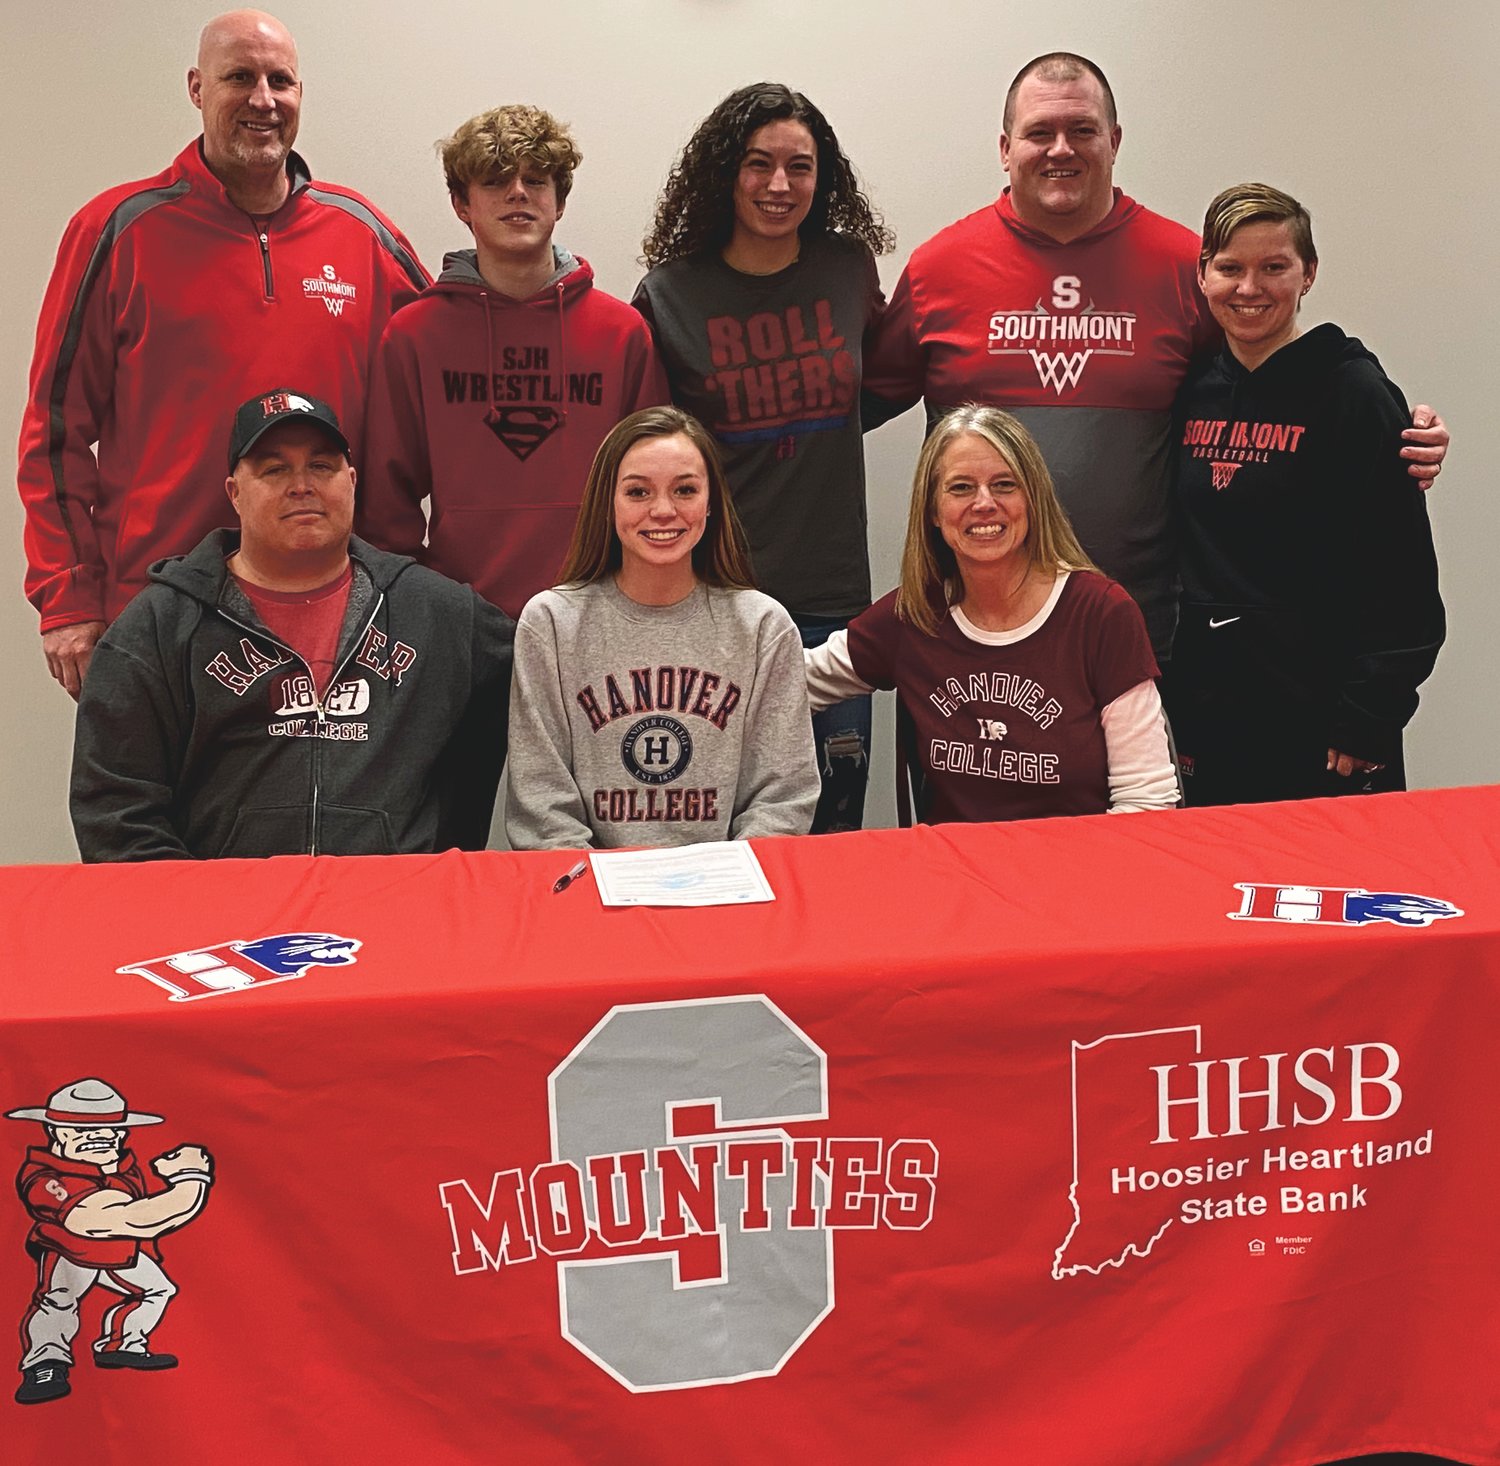 Joined by her family and coaches, Southmont senior Emma Ward celebrated her commitment to continue her academic and basketball career at Hanover College next fall. Ward's sister Lilly, is currently a member of the women's basketball team.